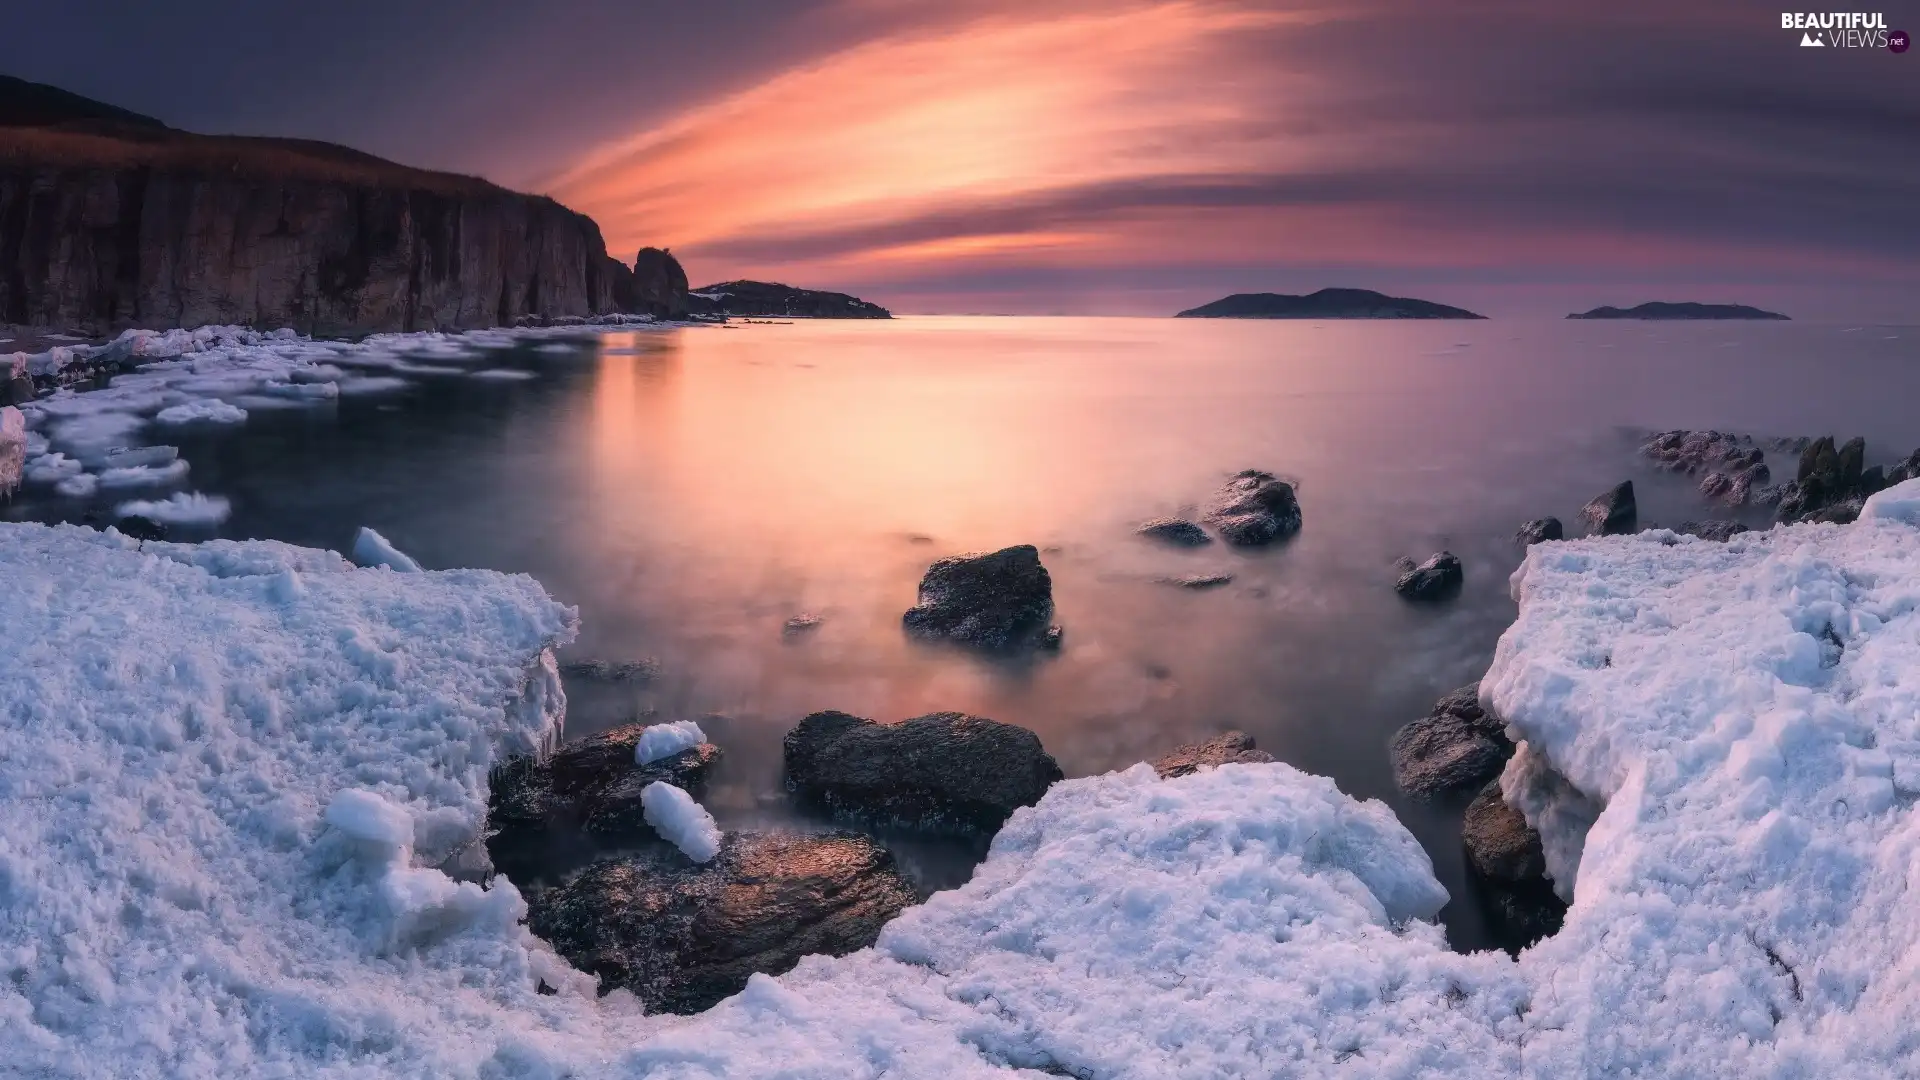 rocks, winter, cliff, Russia, Great Sunsets, Japanese Sea